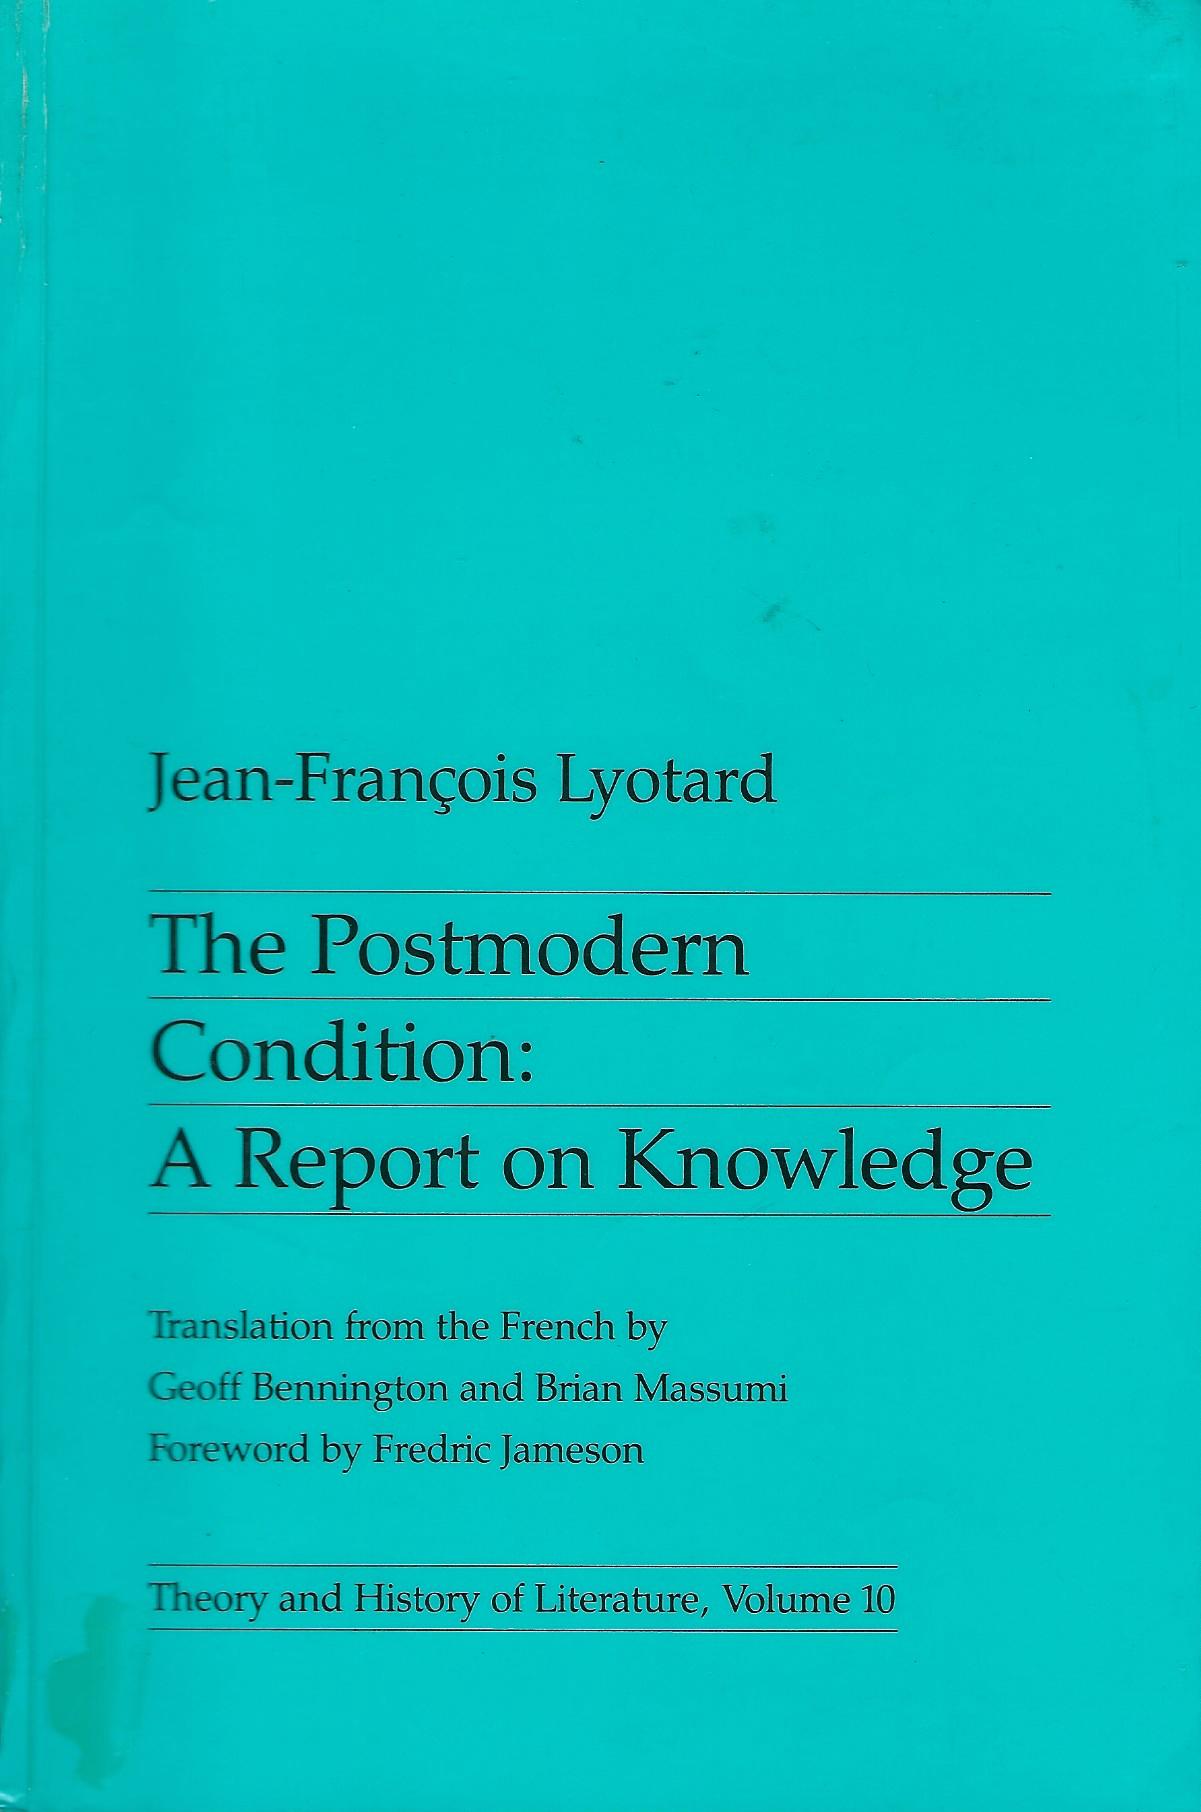 Image for The Postmodern Condition: A Report on Knowledge.